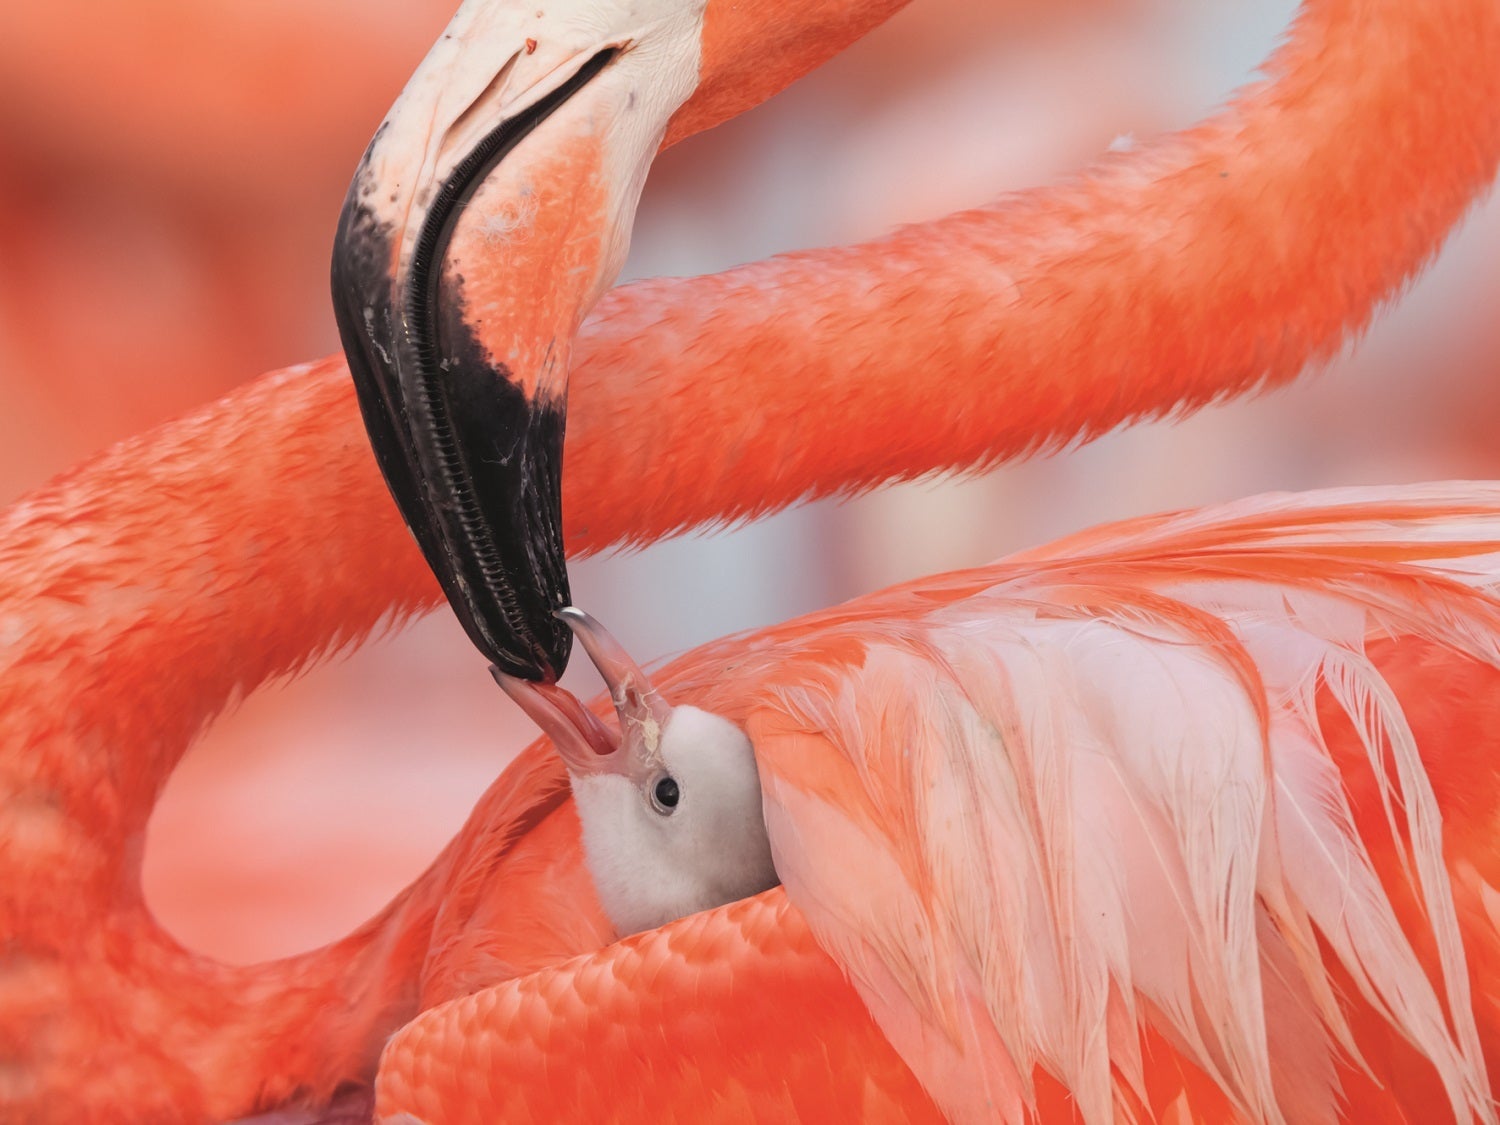 Caribbean flamingo chick being fed by parent while nestled in adult's back feathers